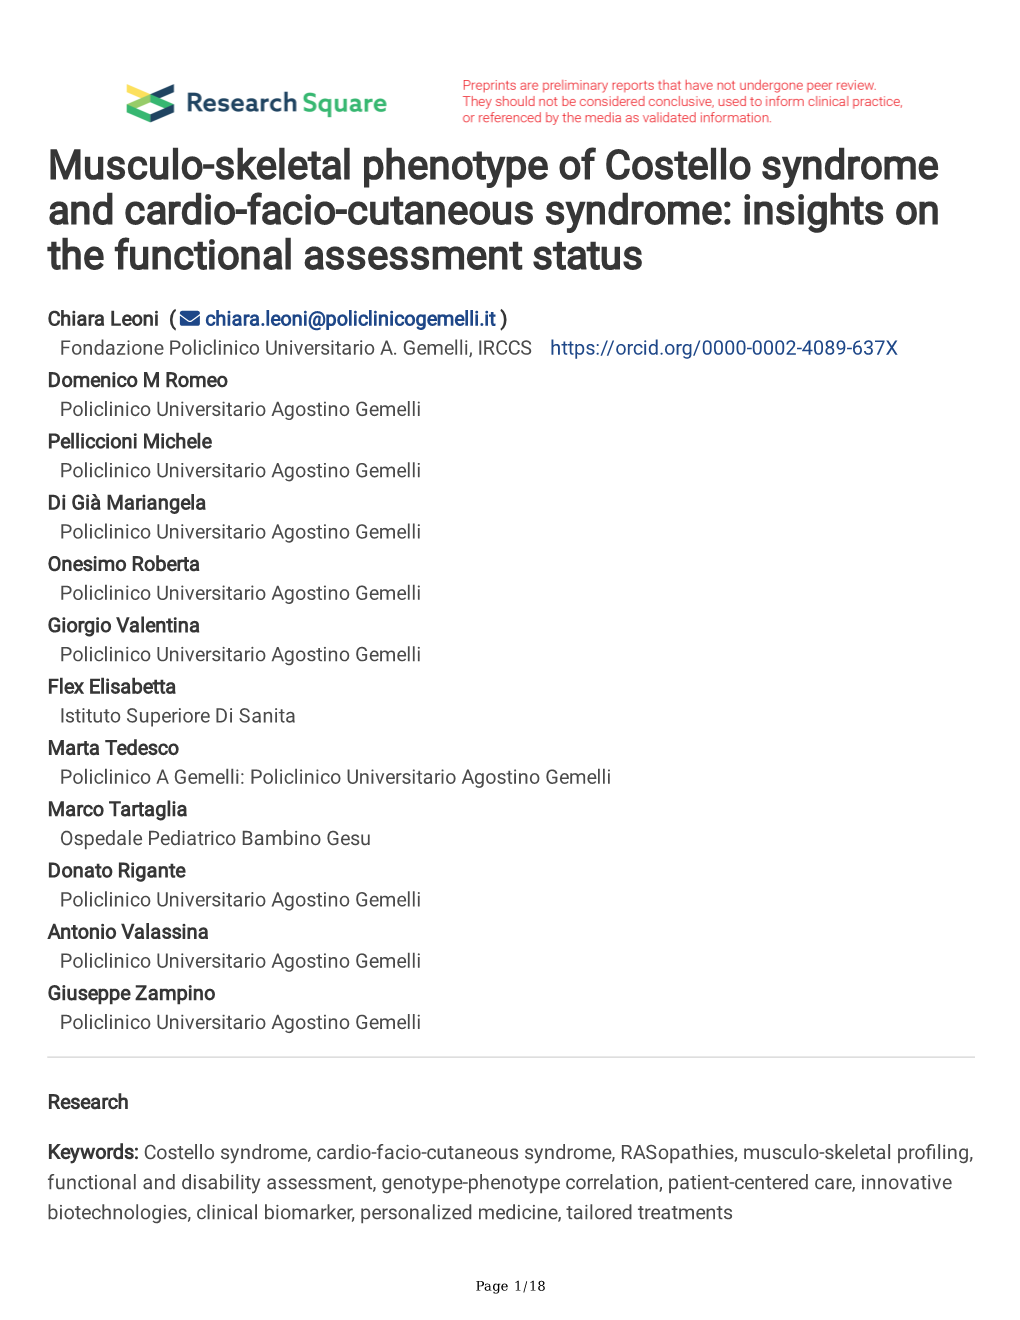 Musculo-Skeletal Phenotype of Costello Syndrome and Cardio-Facio-Cutaneous Syndrome: Insights on the Functional Assessment Status